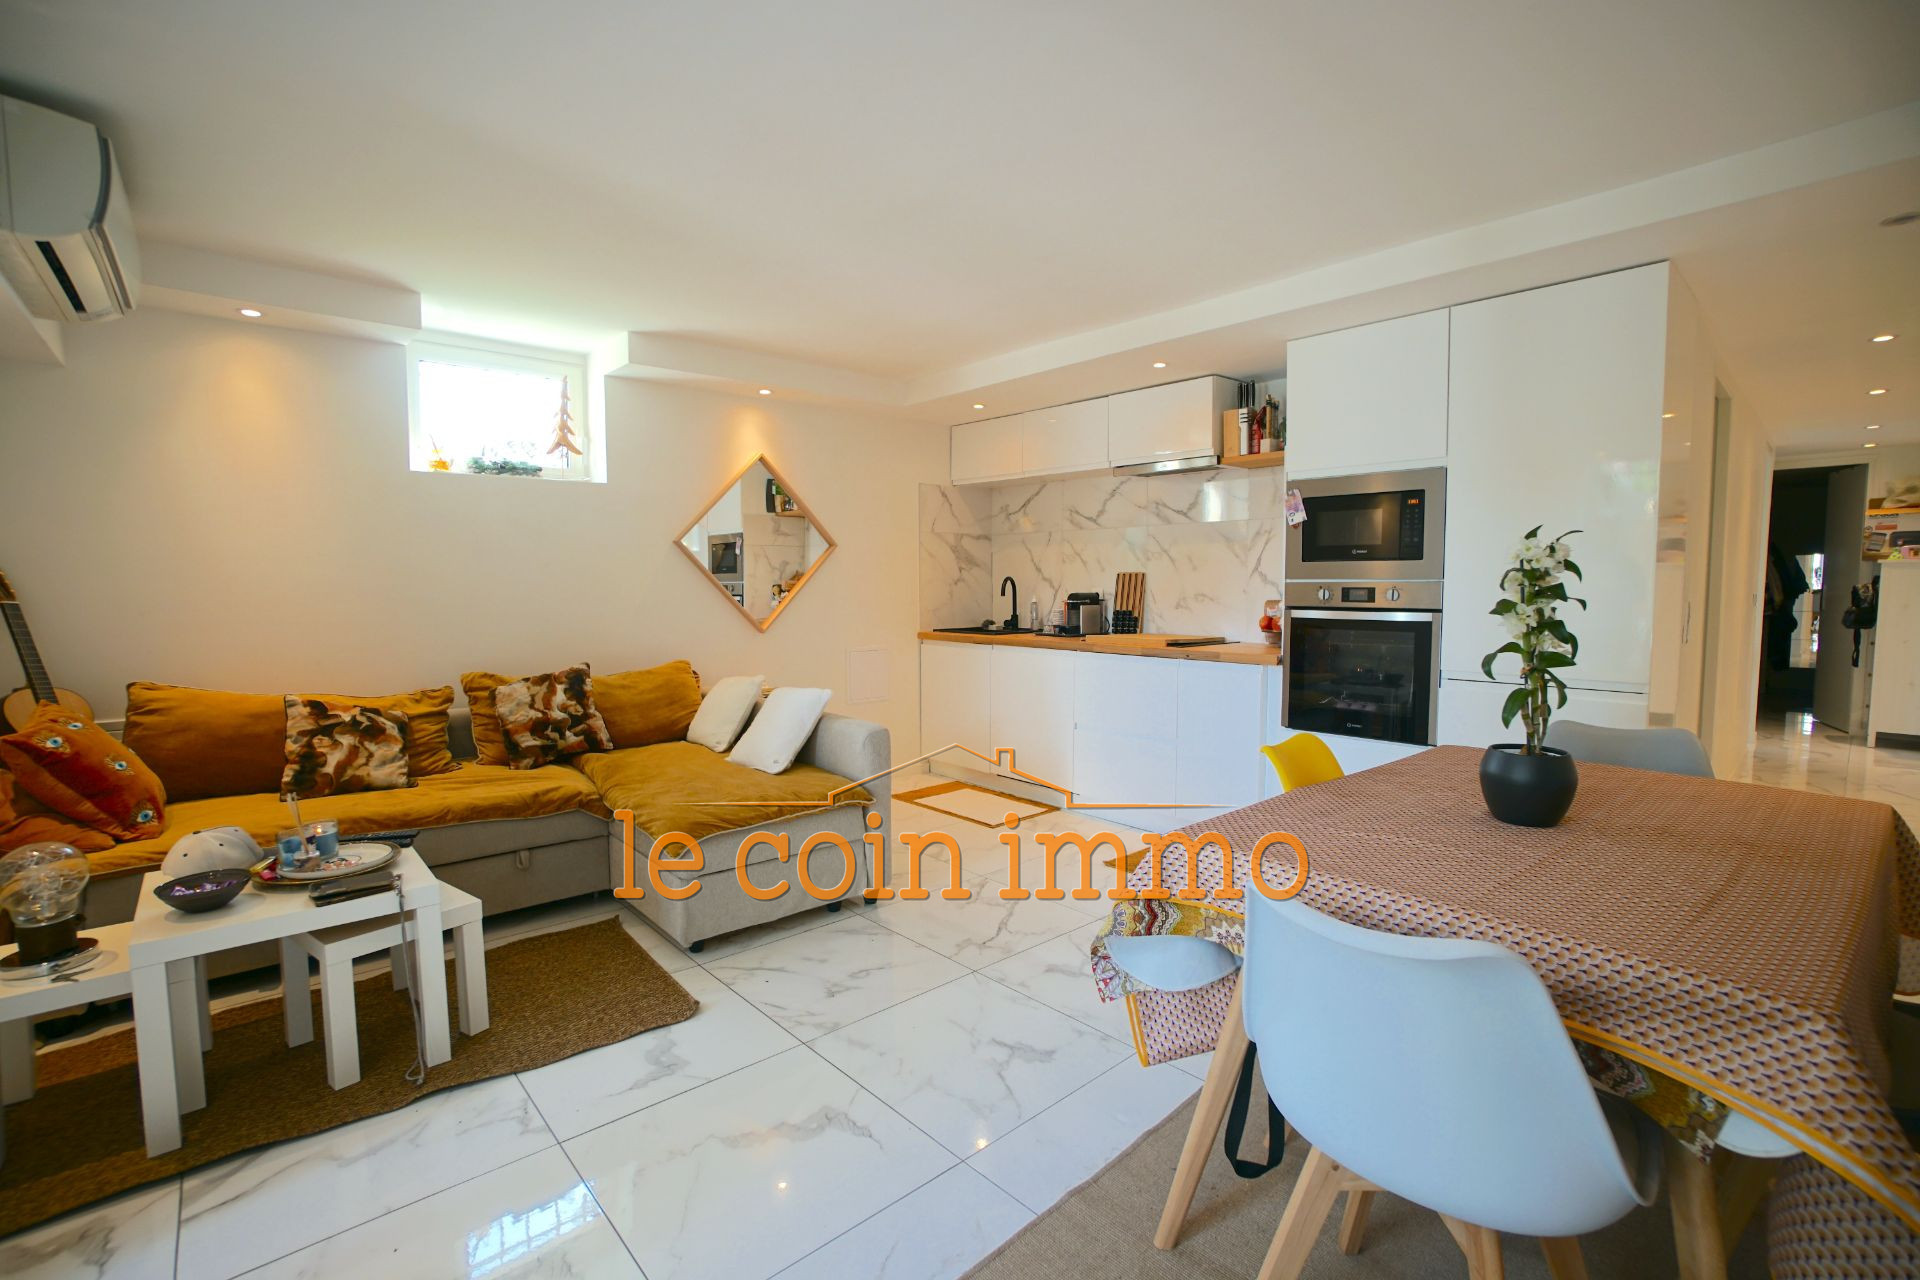 Vente Appartement 60m² à Antibes (06600) - Le Coin Immo